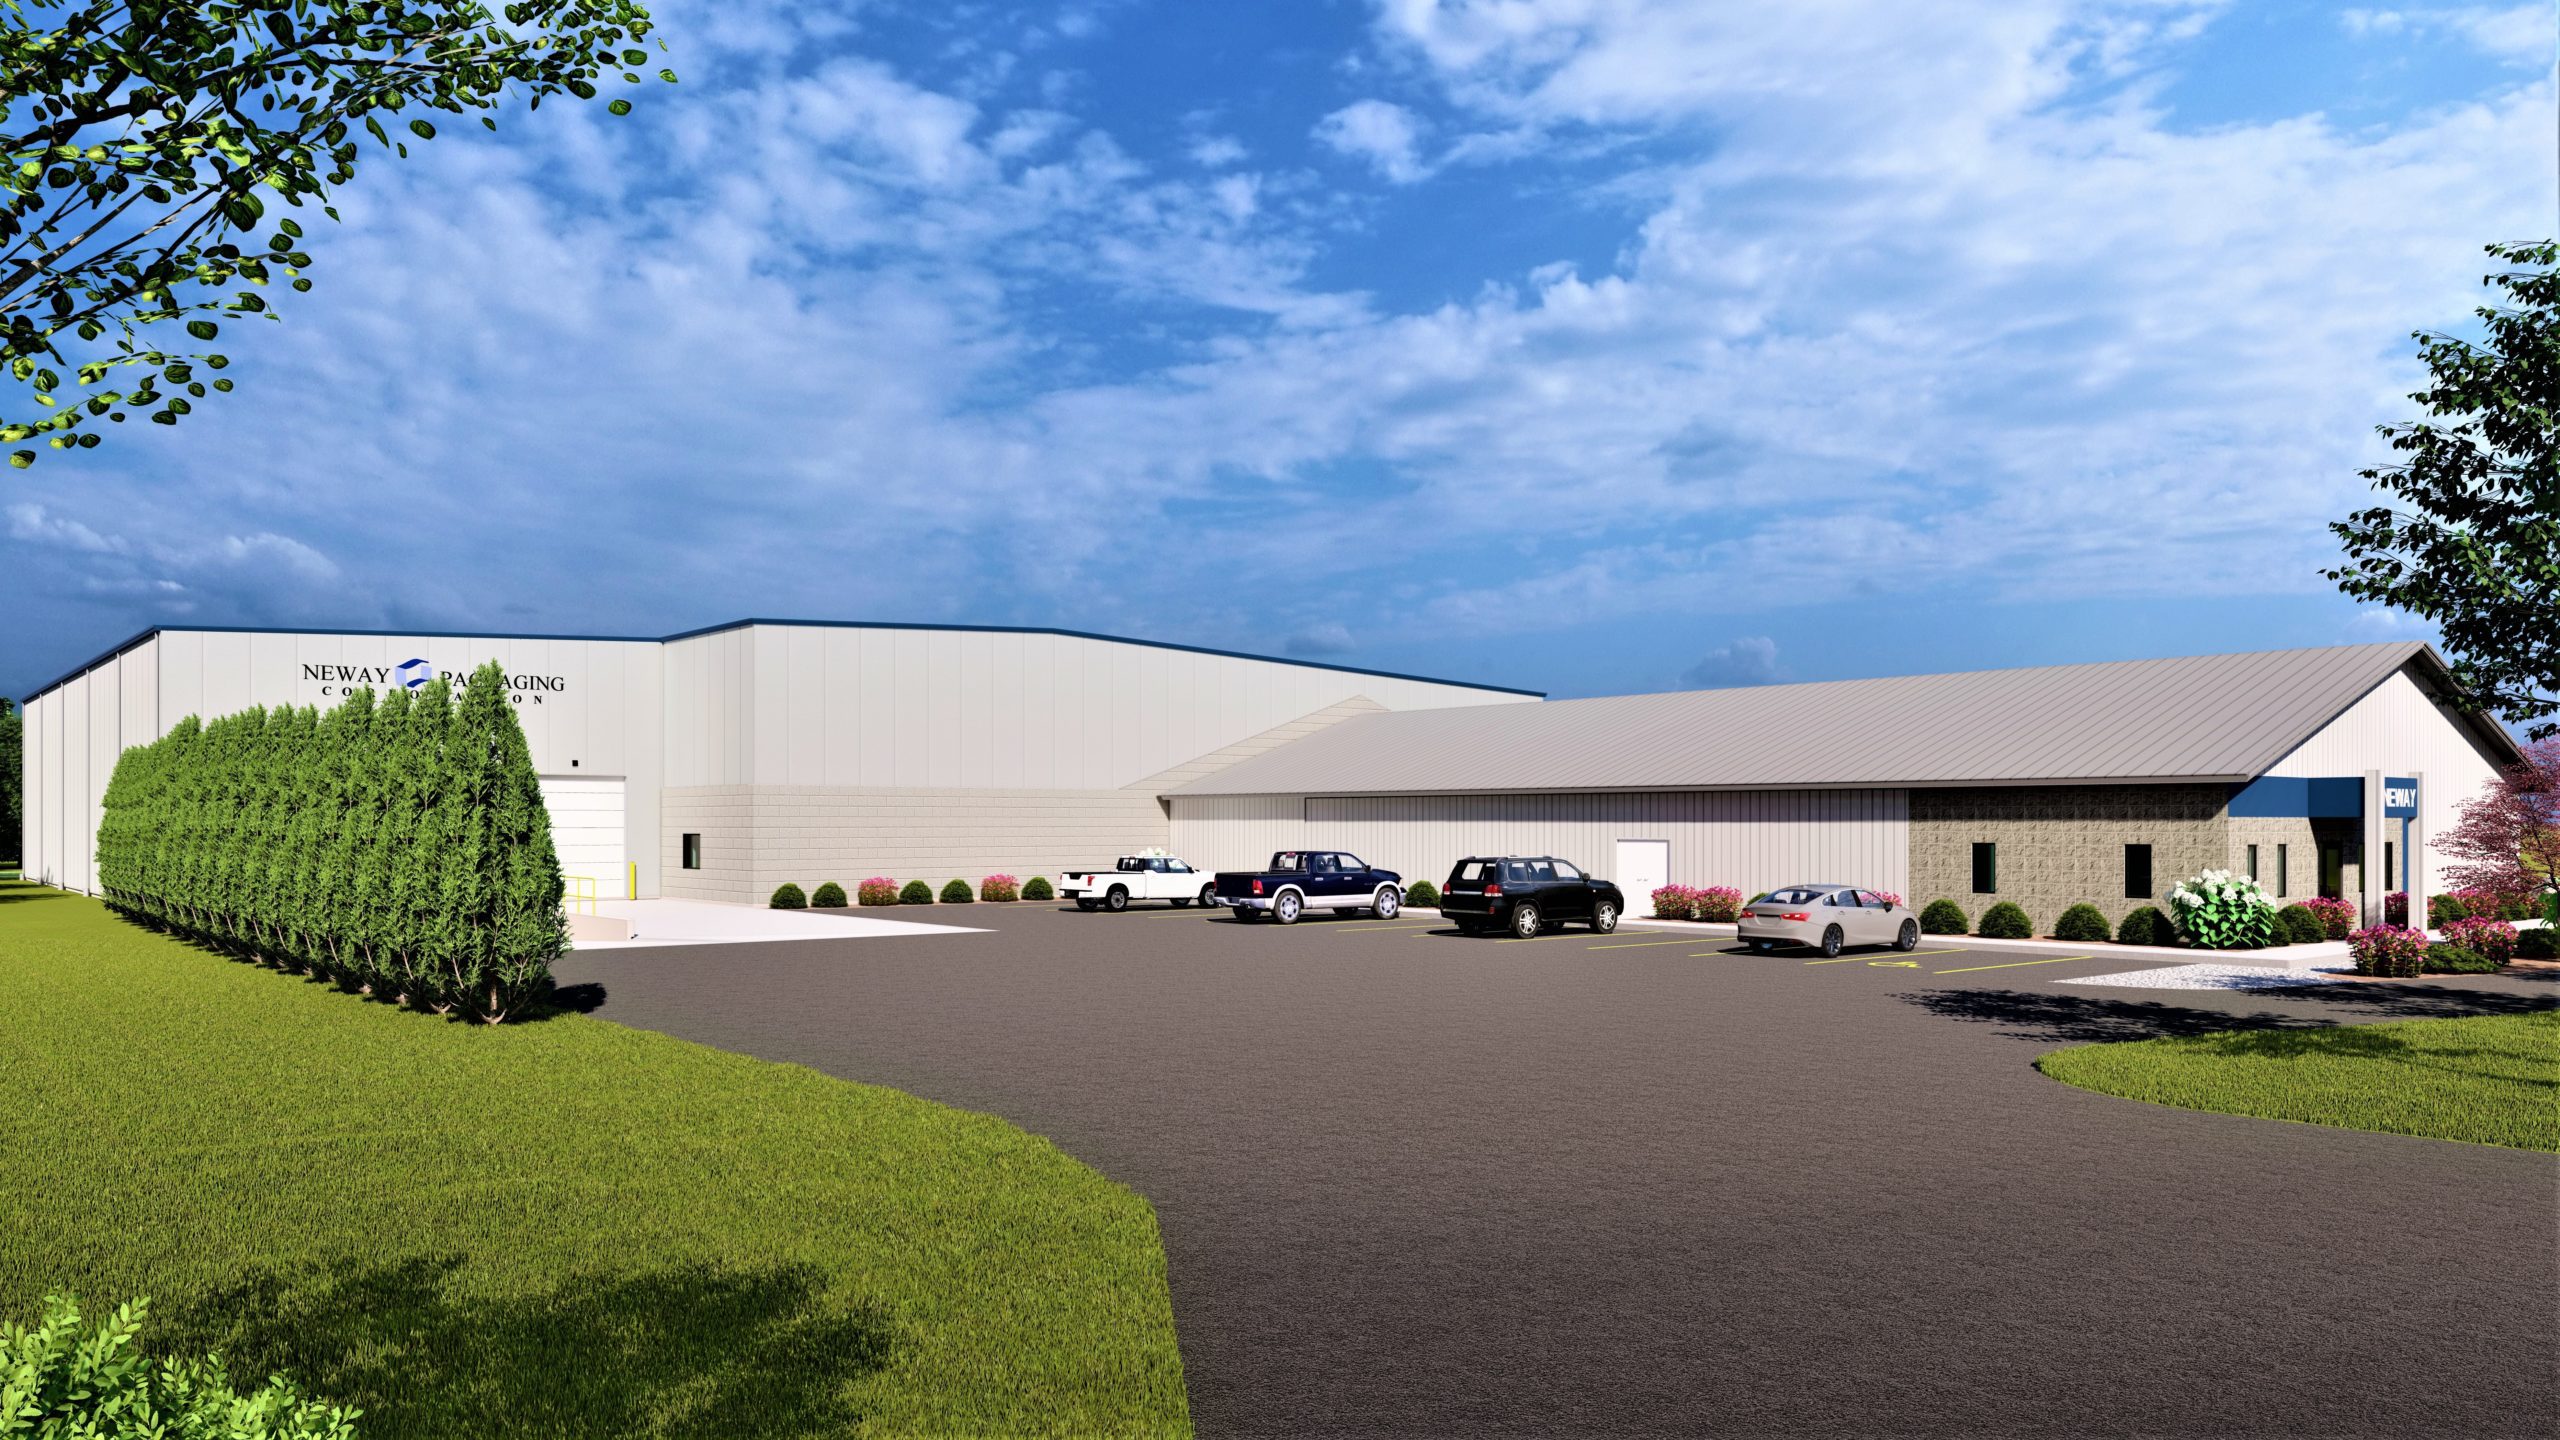 Exterior rendering of packaging industrial facility